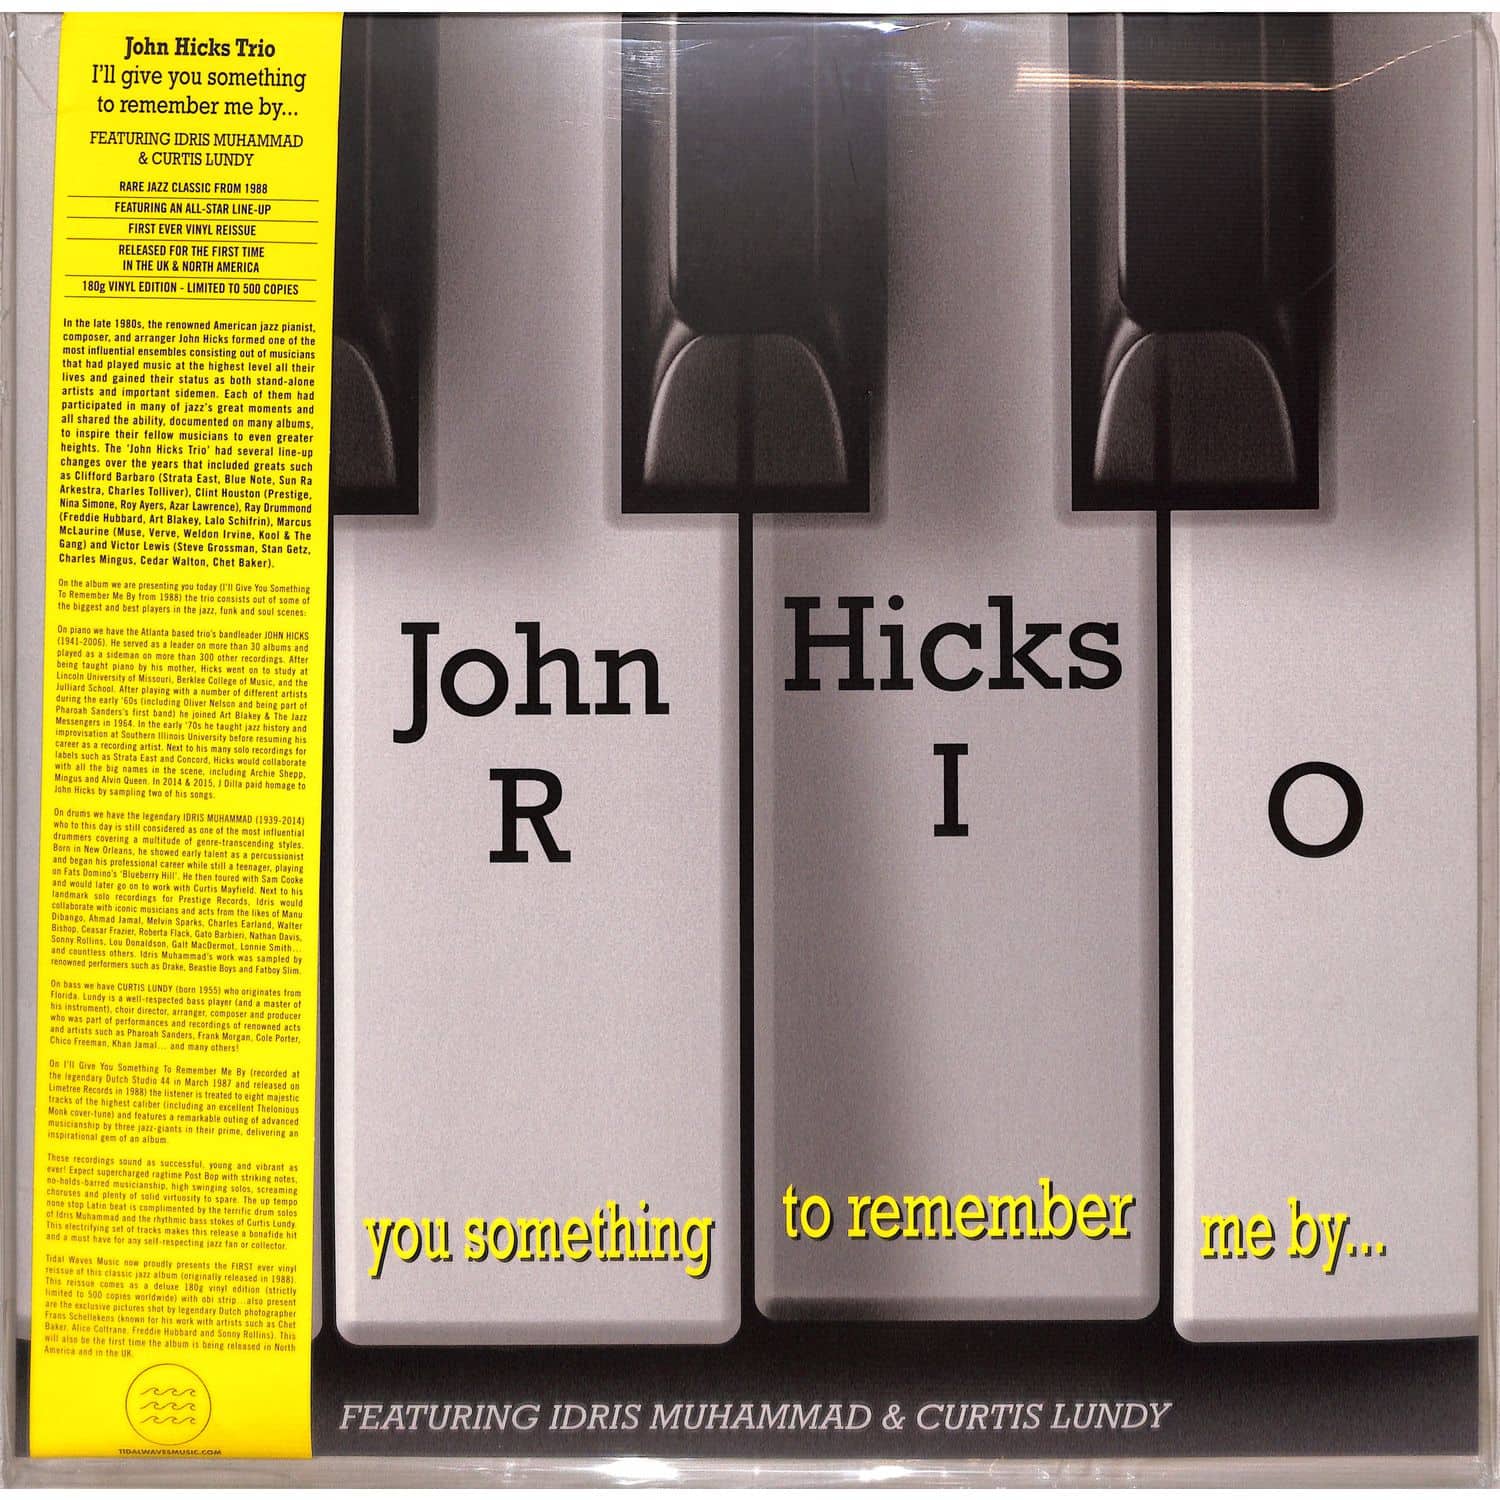 John Hicks Trio - I LL GIVE YOU SOMETHING TO REMEMBER ME BY 